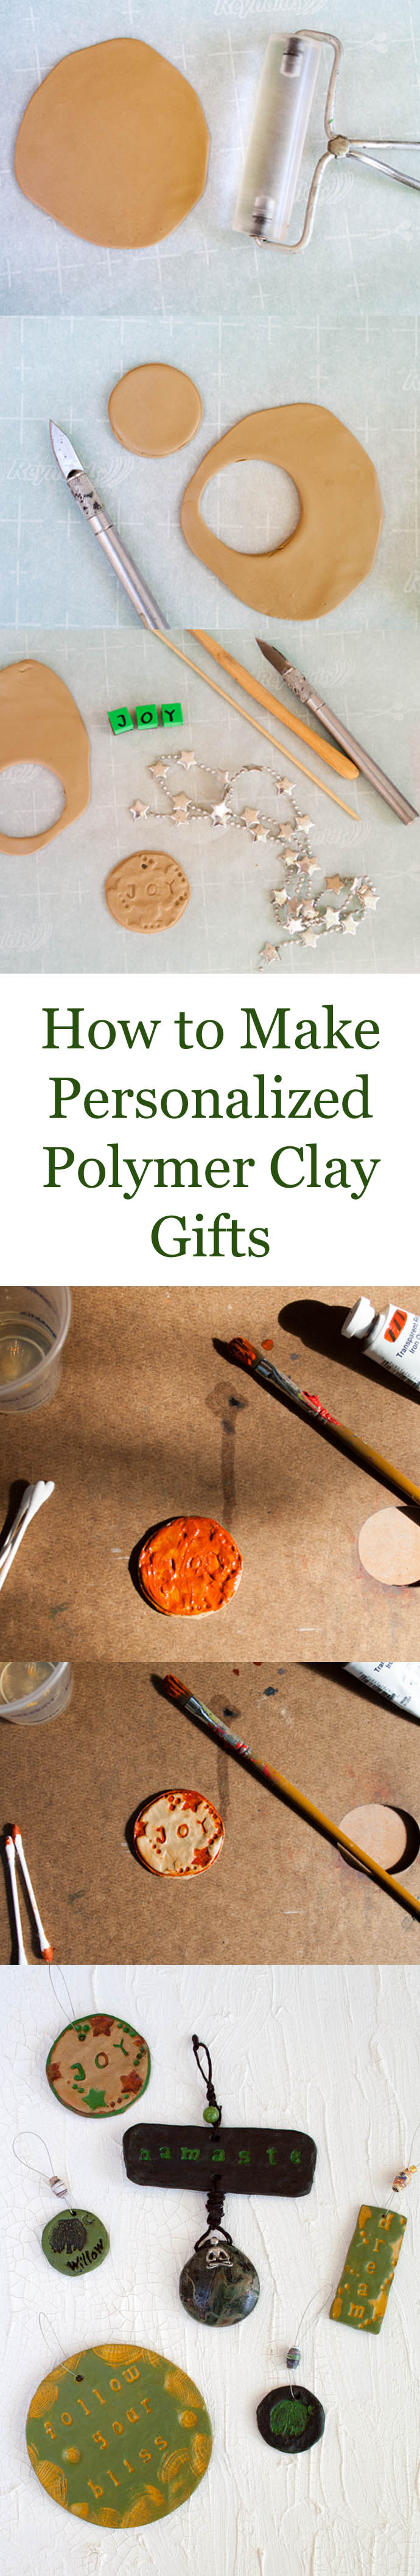 How to Make Personalized Polymer Clay Gifts collage photo with text.